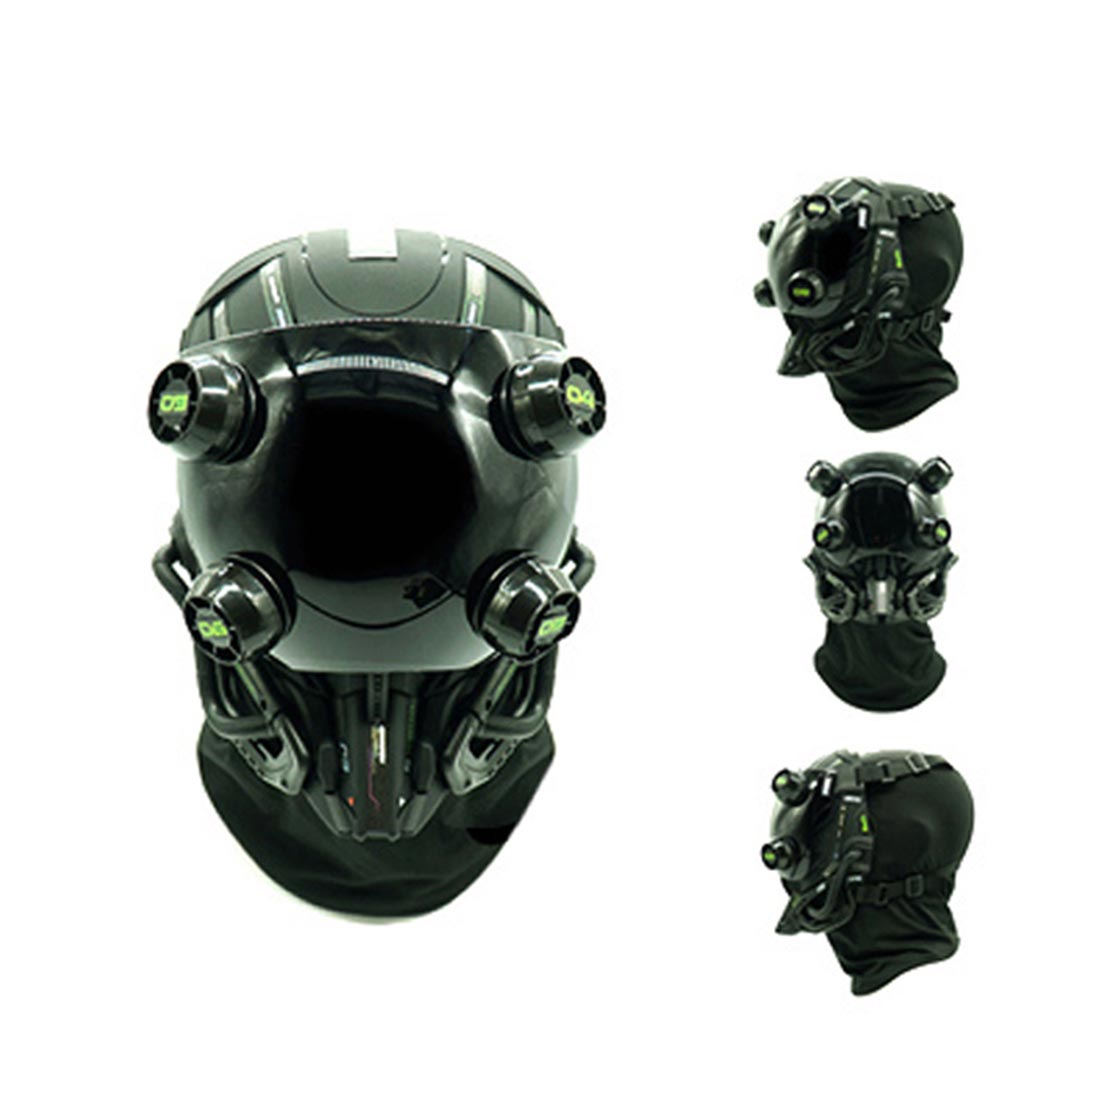 CyberPunk Helmet For Men And Women Full Face Stormtrooper Mask Party City  For Halloween Cosplay And Motorcycle Riding Techwear Costume Accessory  230614 From Wai09, $26.09